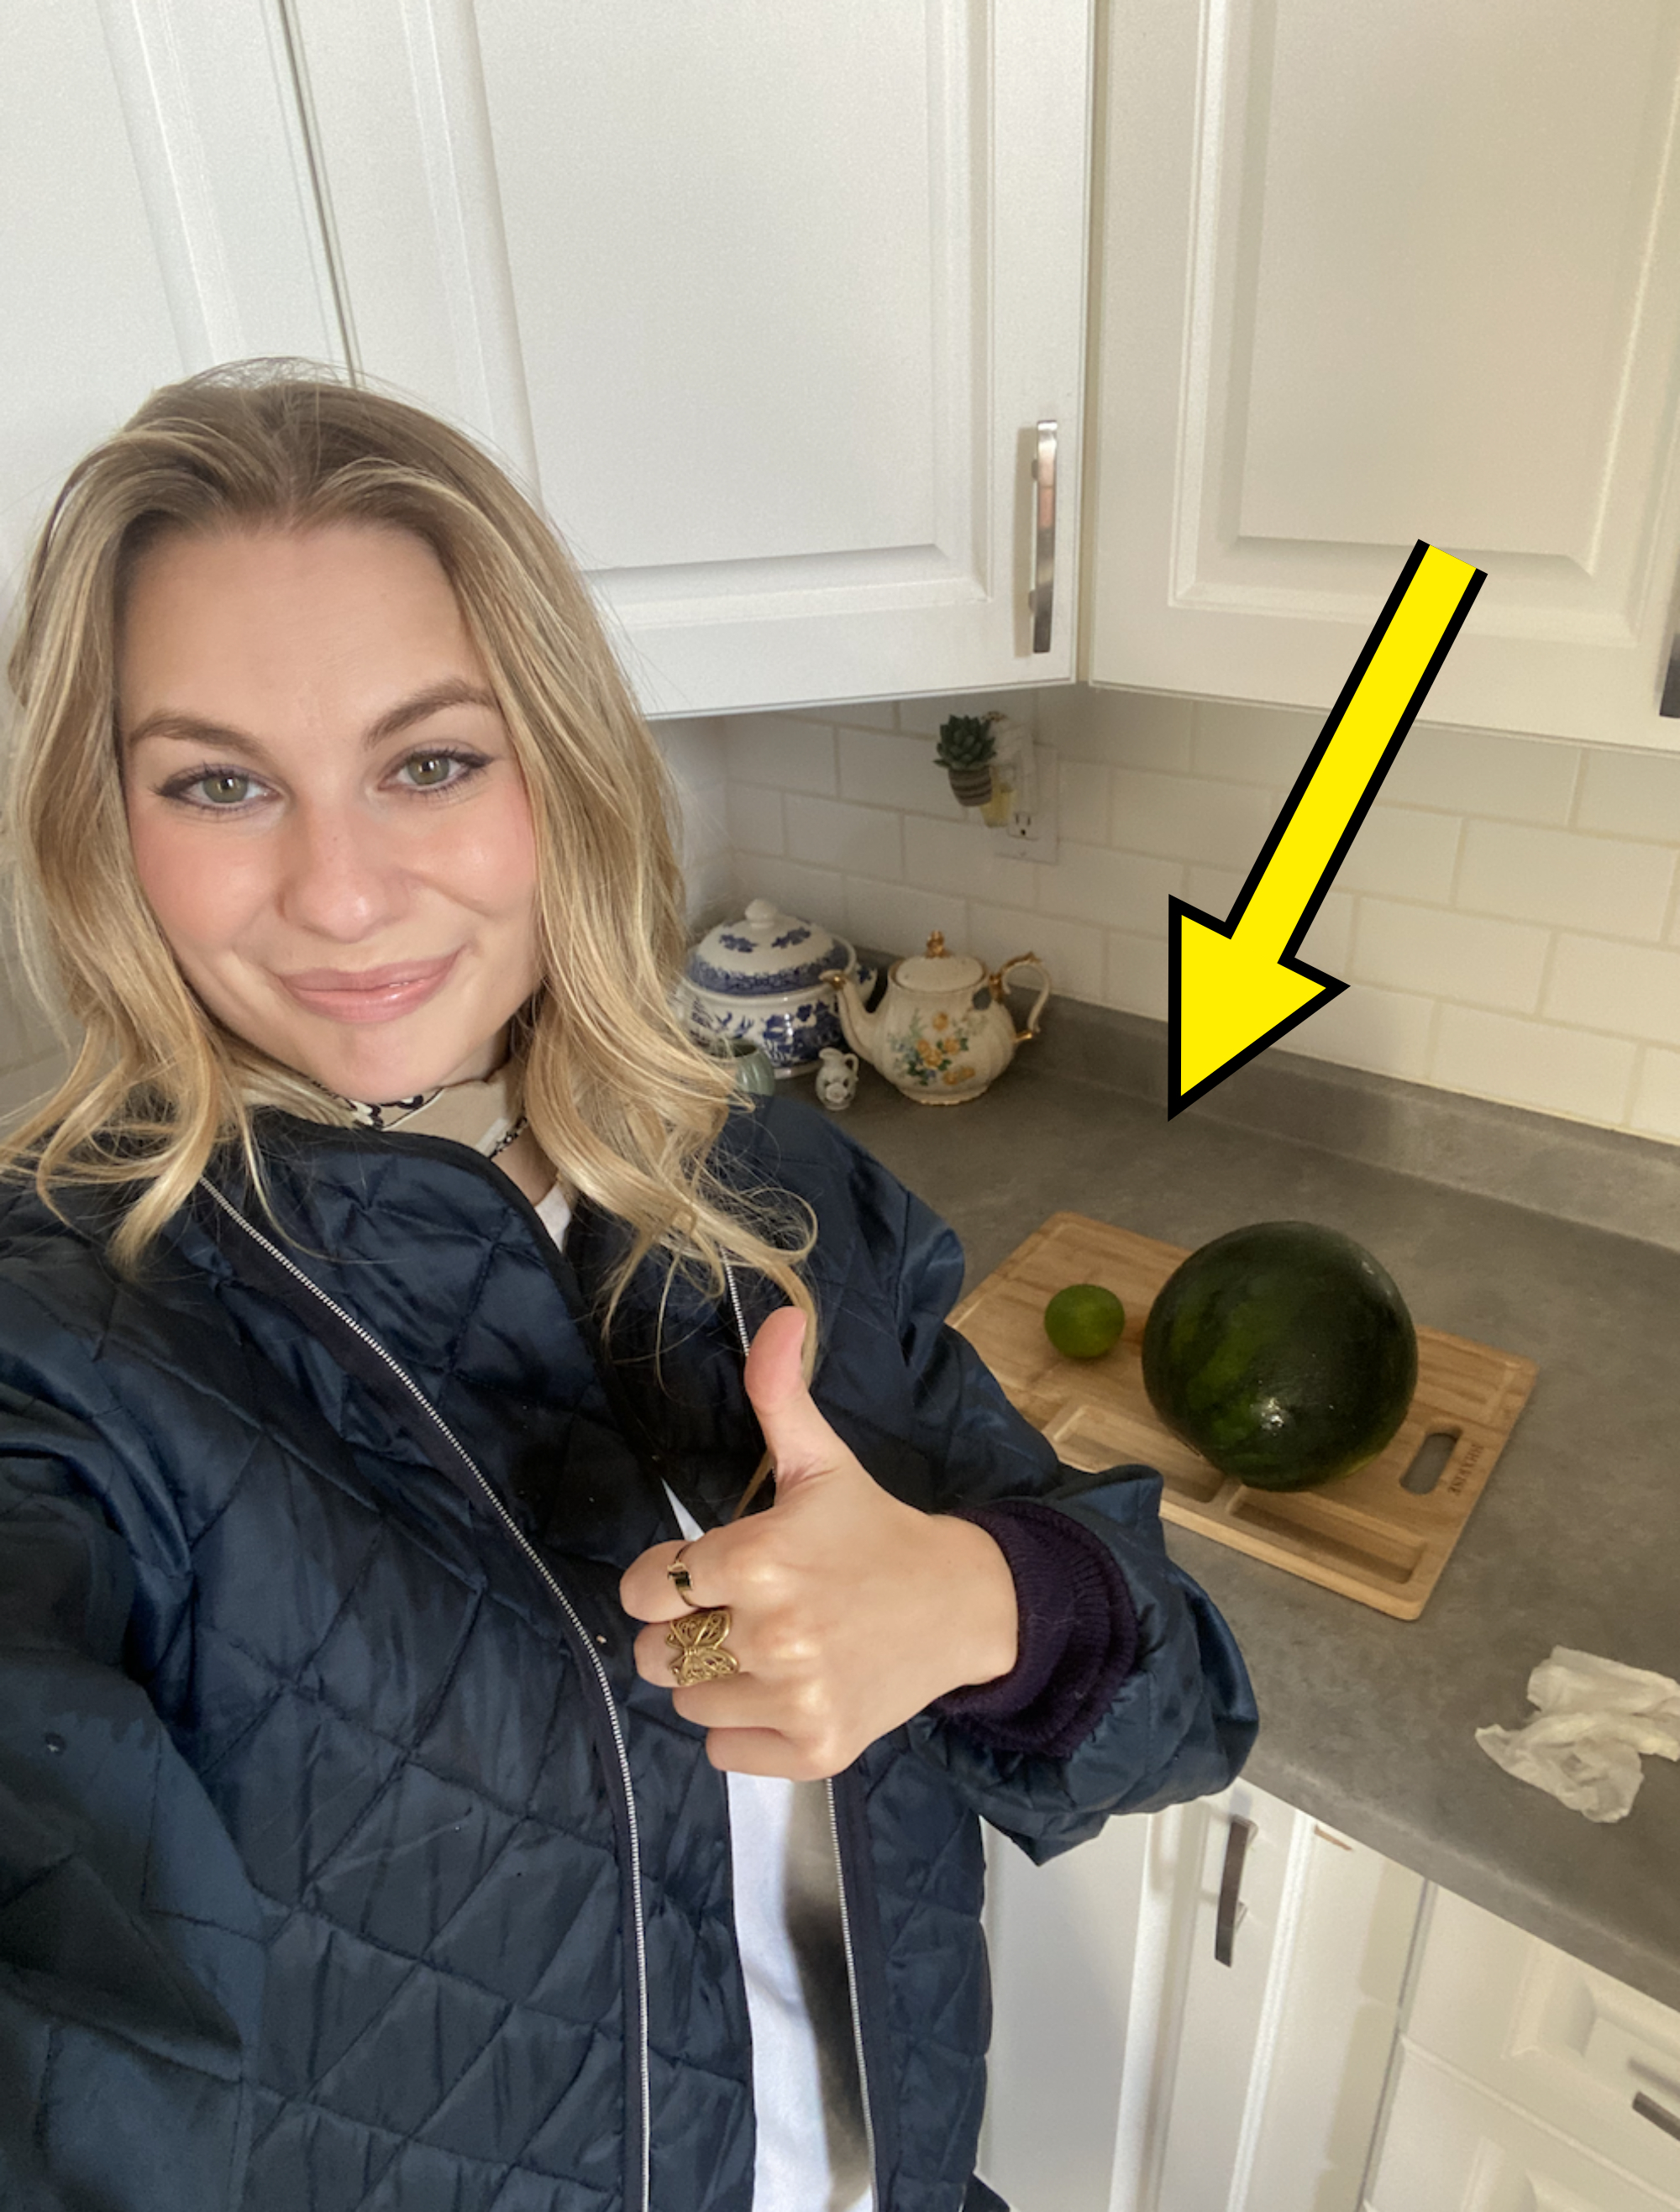 Me smiling with my thumb up standing in my kitchen next to a cutting board that has a watermelon and lime sitting on it